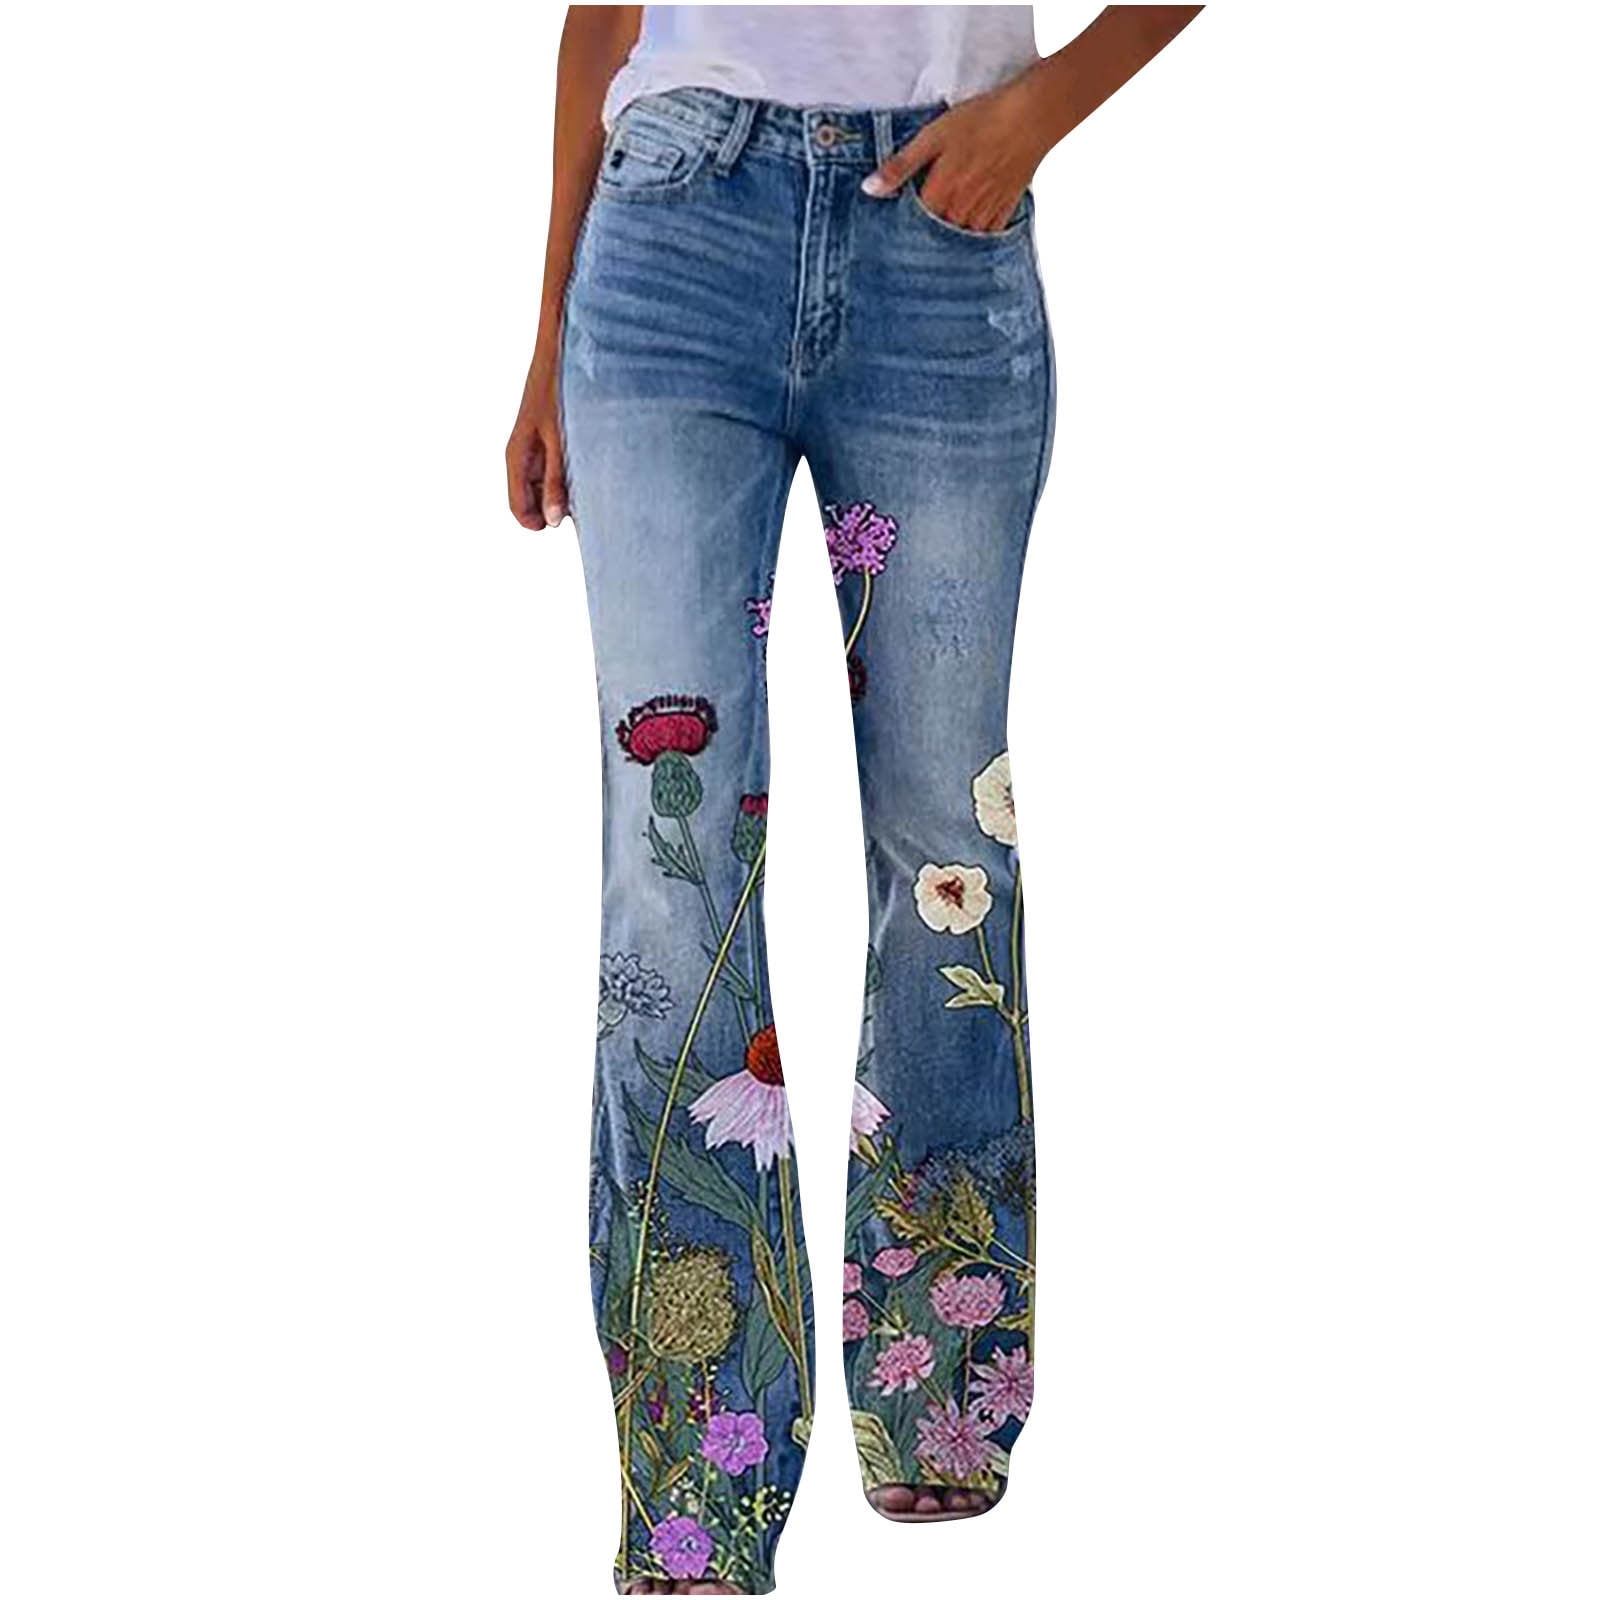 Womens Floral Lace Flare Jeans High Waisted Stretch Bell Bottom